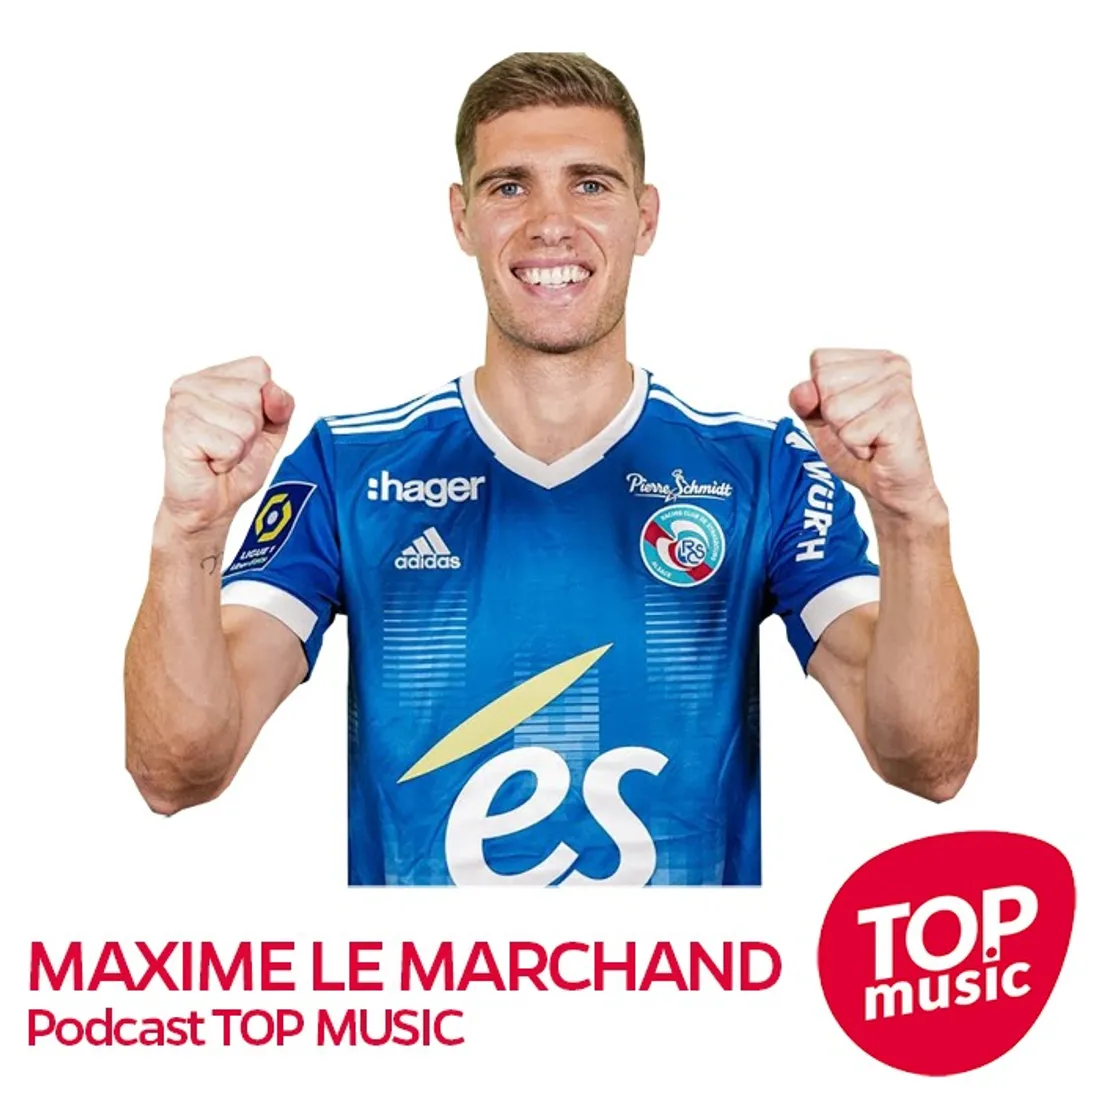 Podcast - Maxime Le Marchand